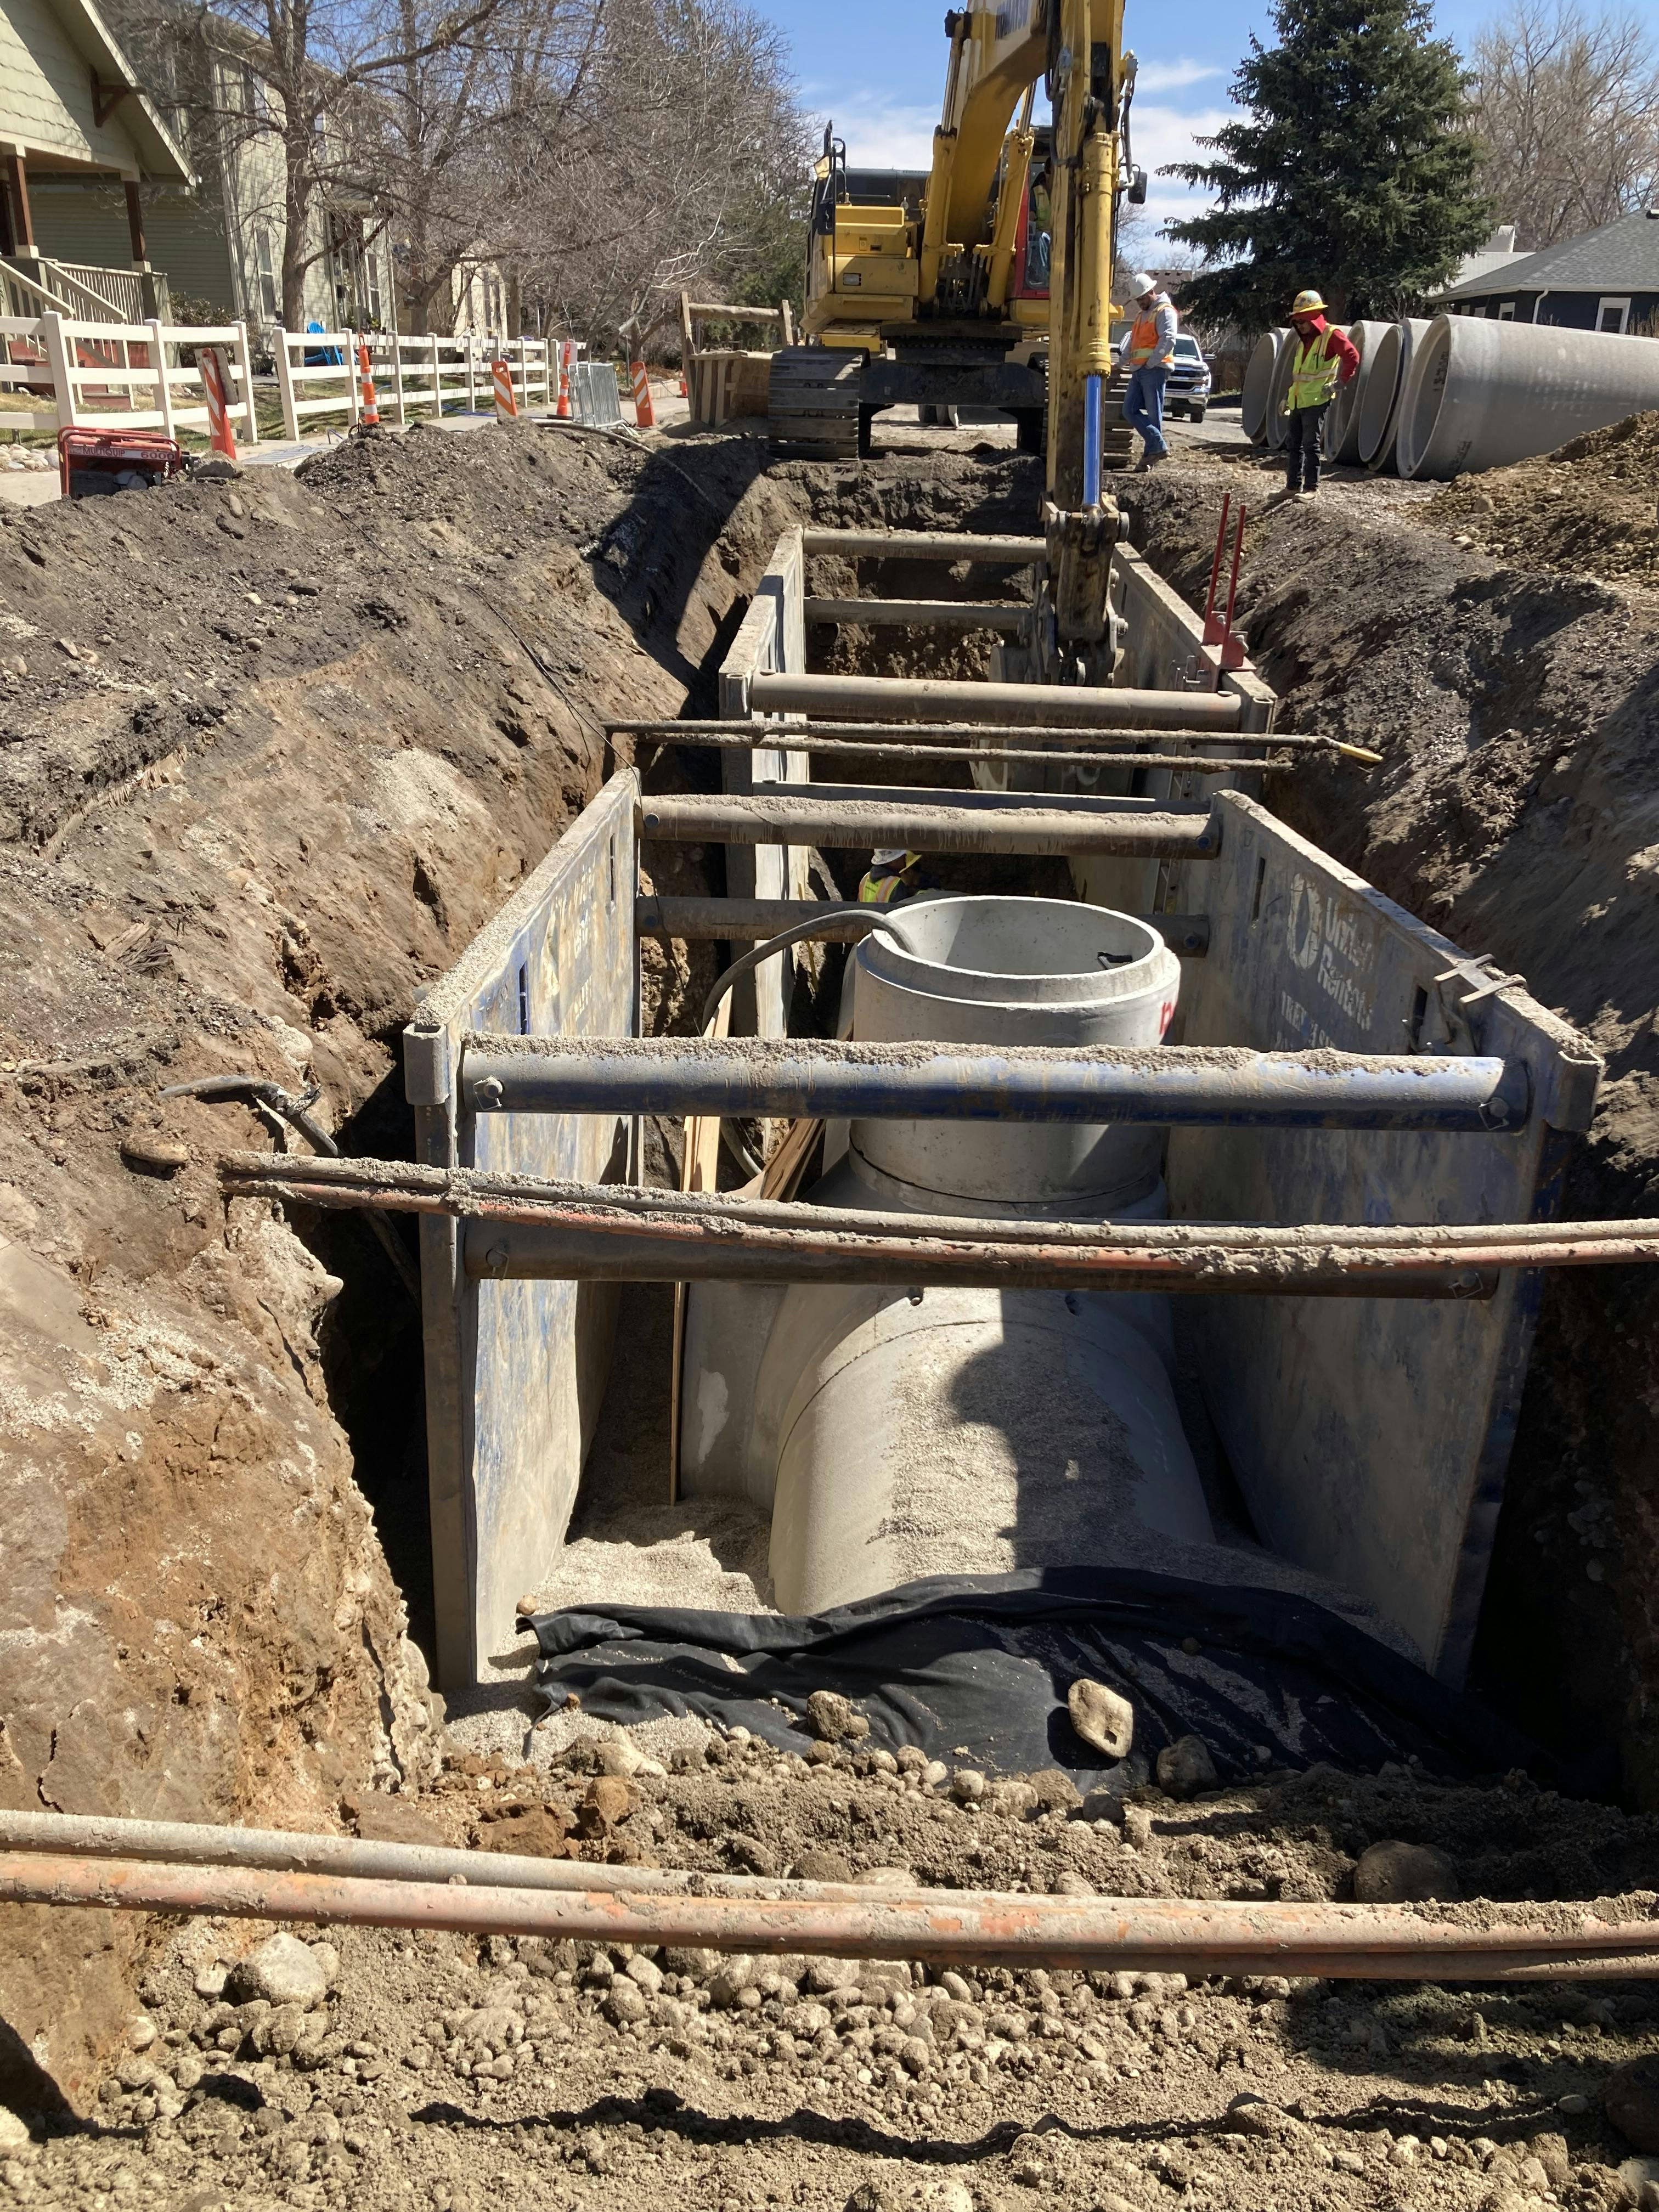 April 25, 2022 - Construction crews installing 60-in concrete storm sewer on W. 1st Street.